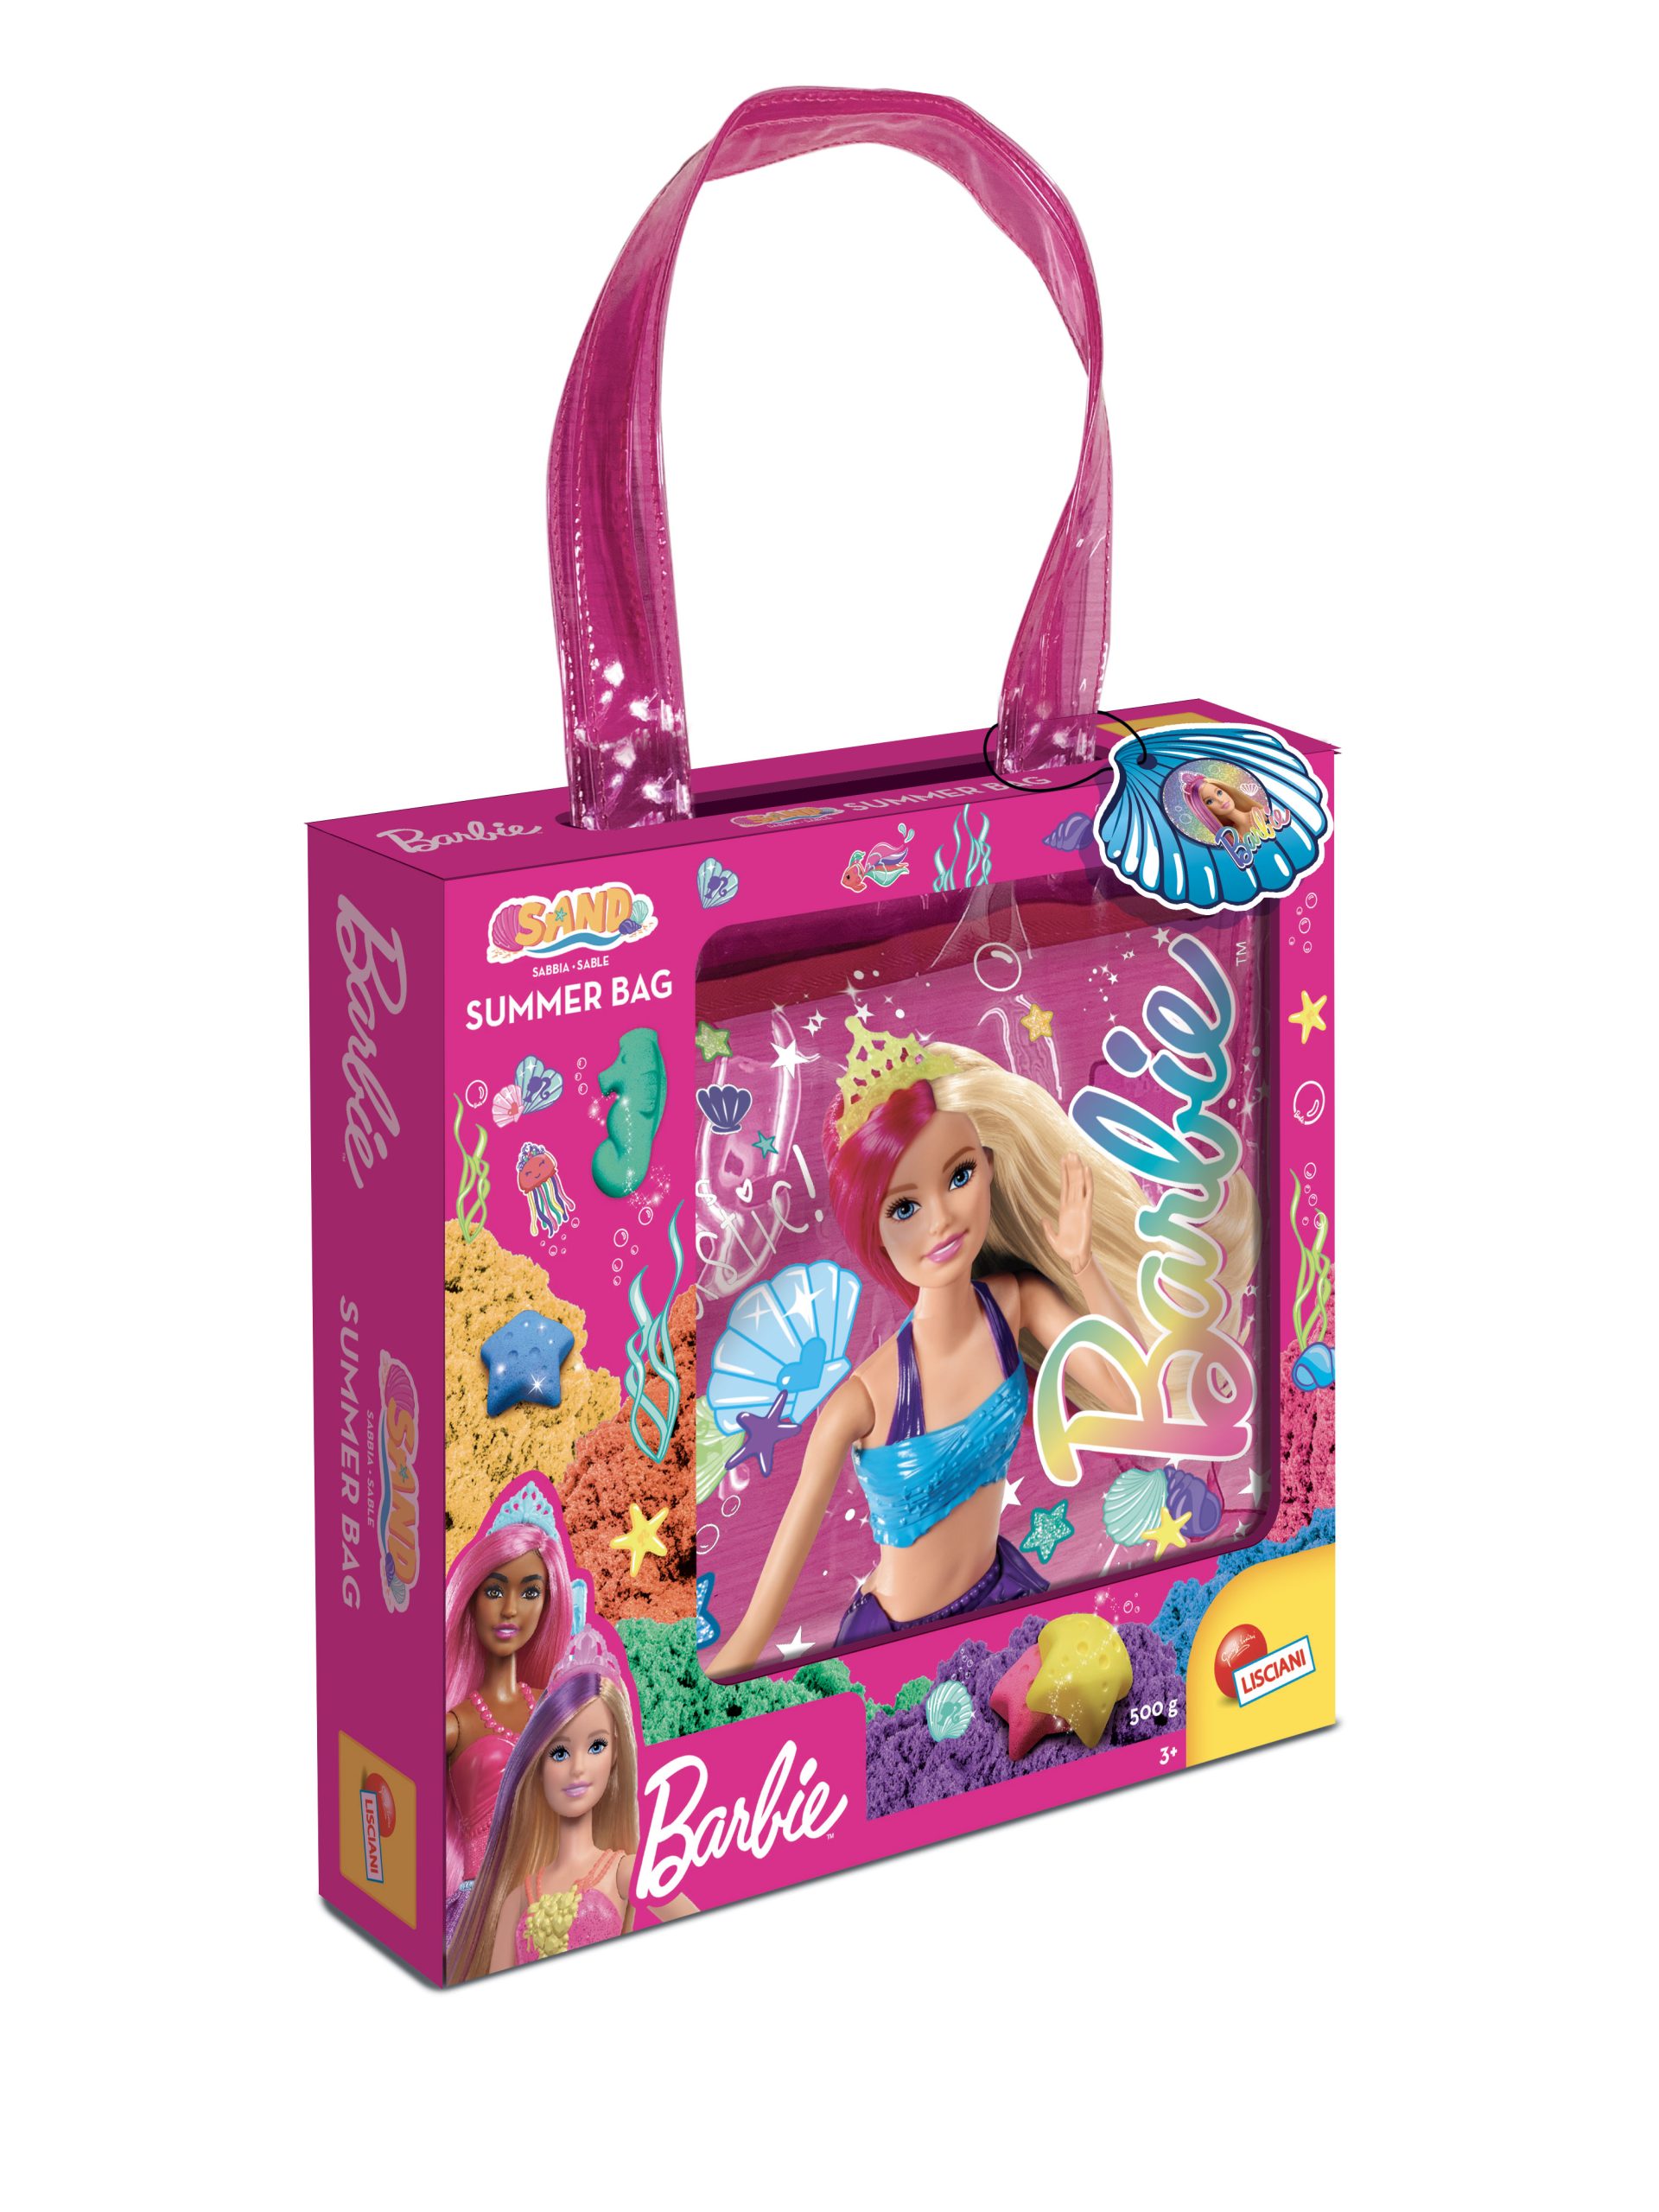 Photo 1 of the game BARBIE SAND SUMMER BAG 500 G